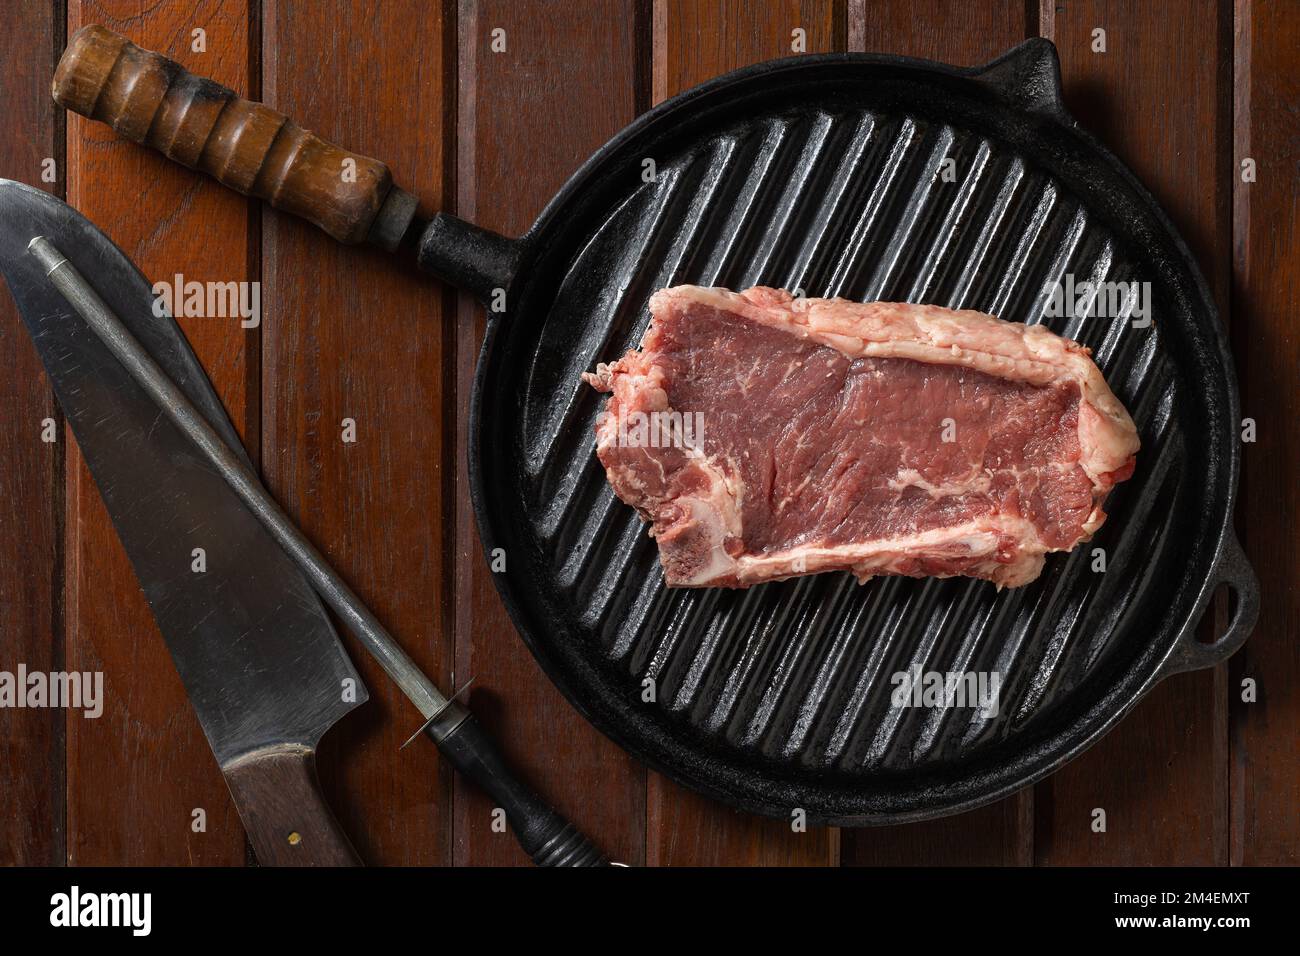 Top view of raw Argentine steak on a griddle. Stock Photo